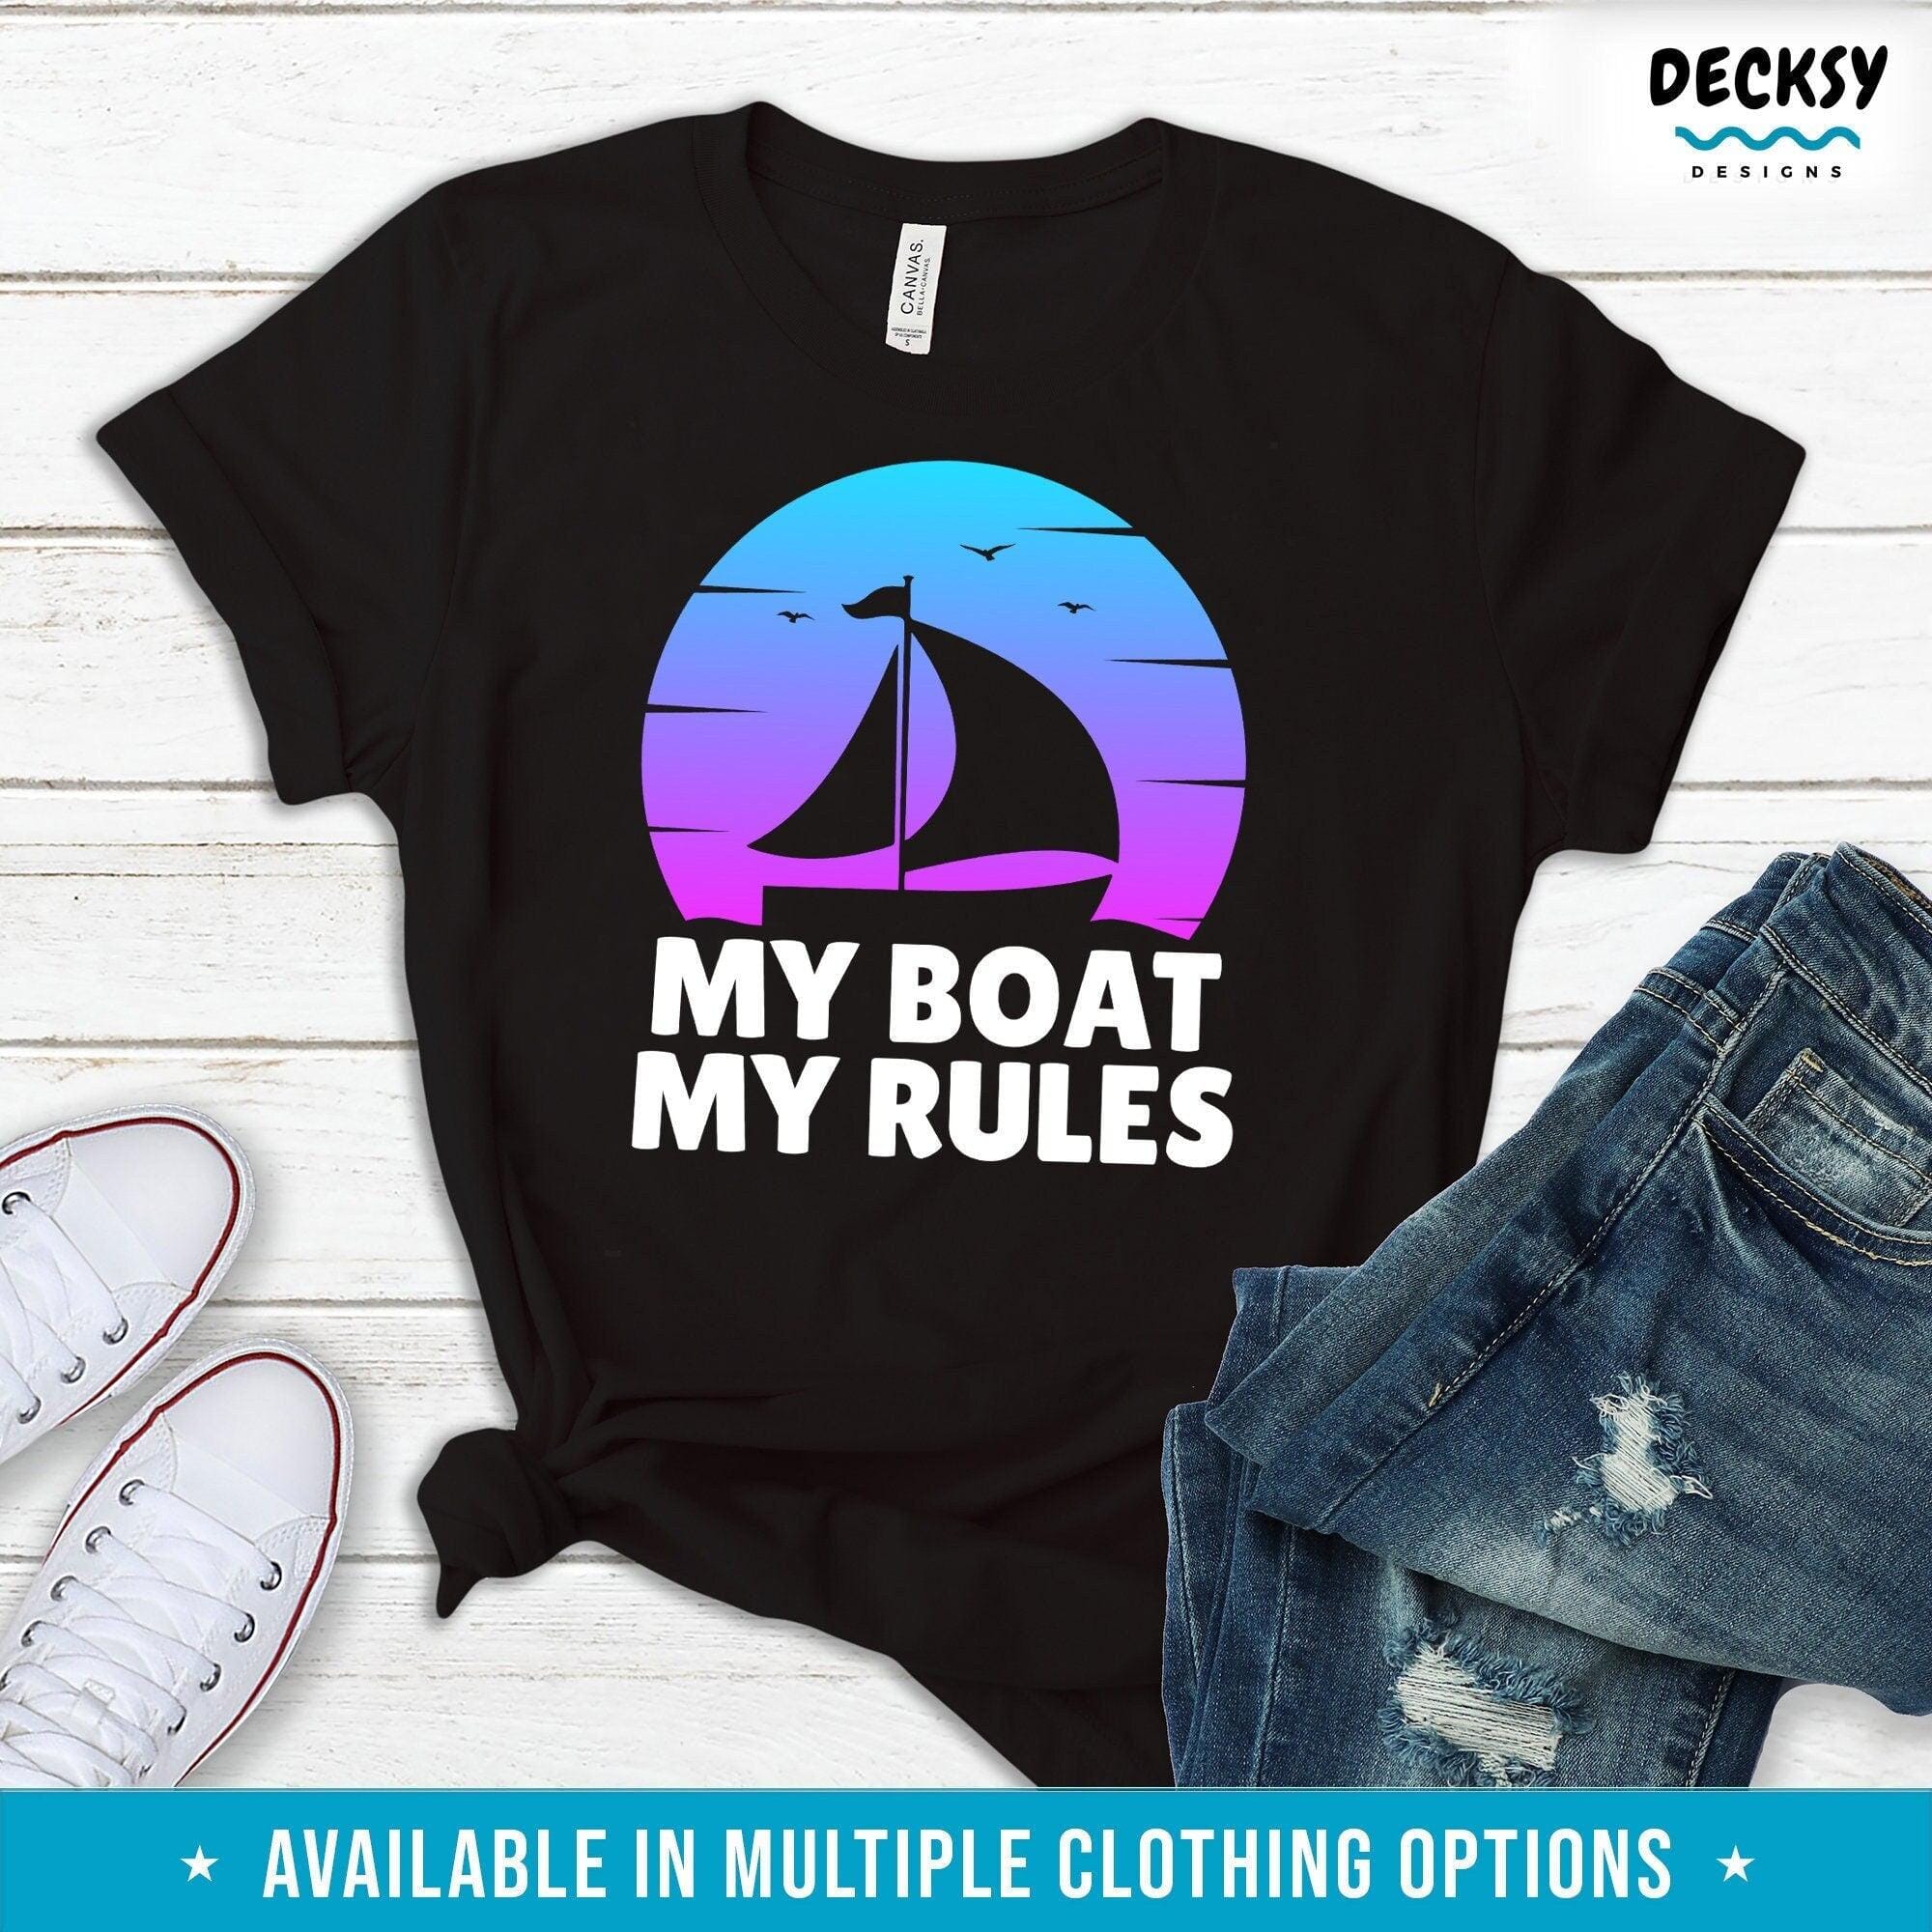 Boat Owner Shirt, Gift For Boat Lover-Clothing:Gender-Neutral Adult Clothing:Tops & Tees:T-shirts:Graphic Tees-DecksyDesigns